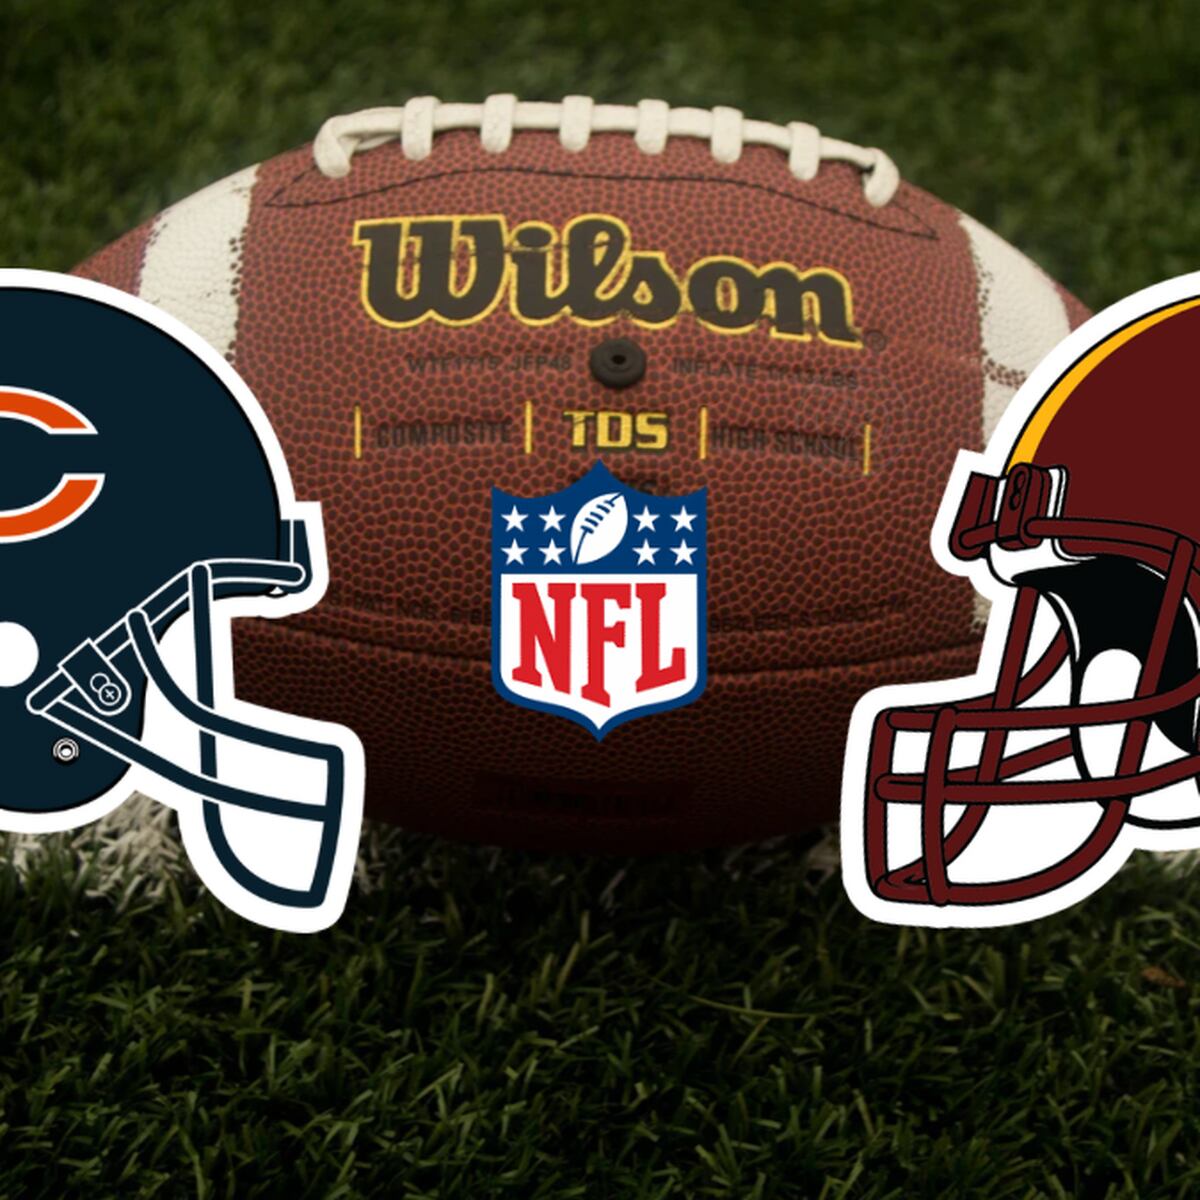 Chicago Bears vs Washington Commanders: times, how to watch on TV